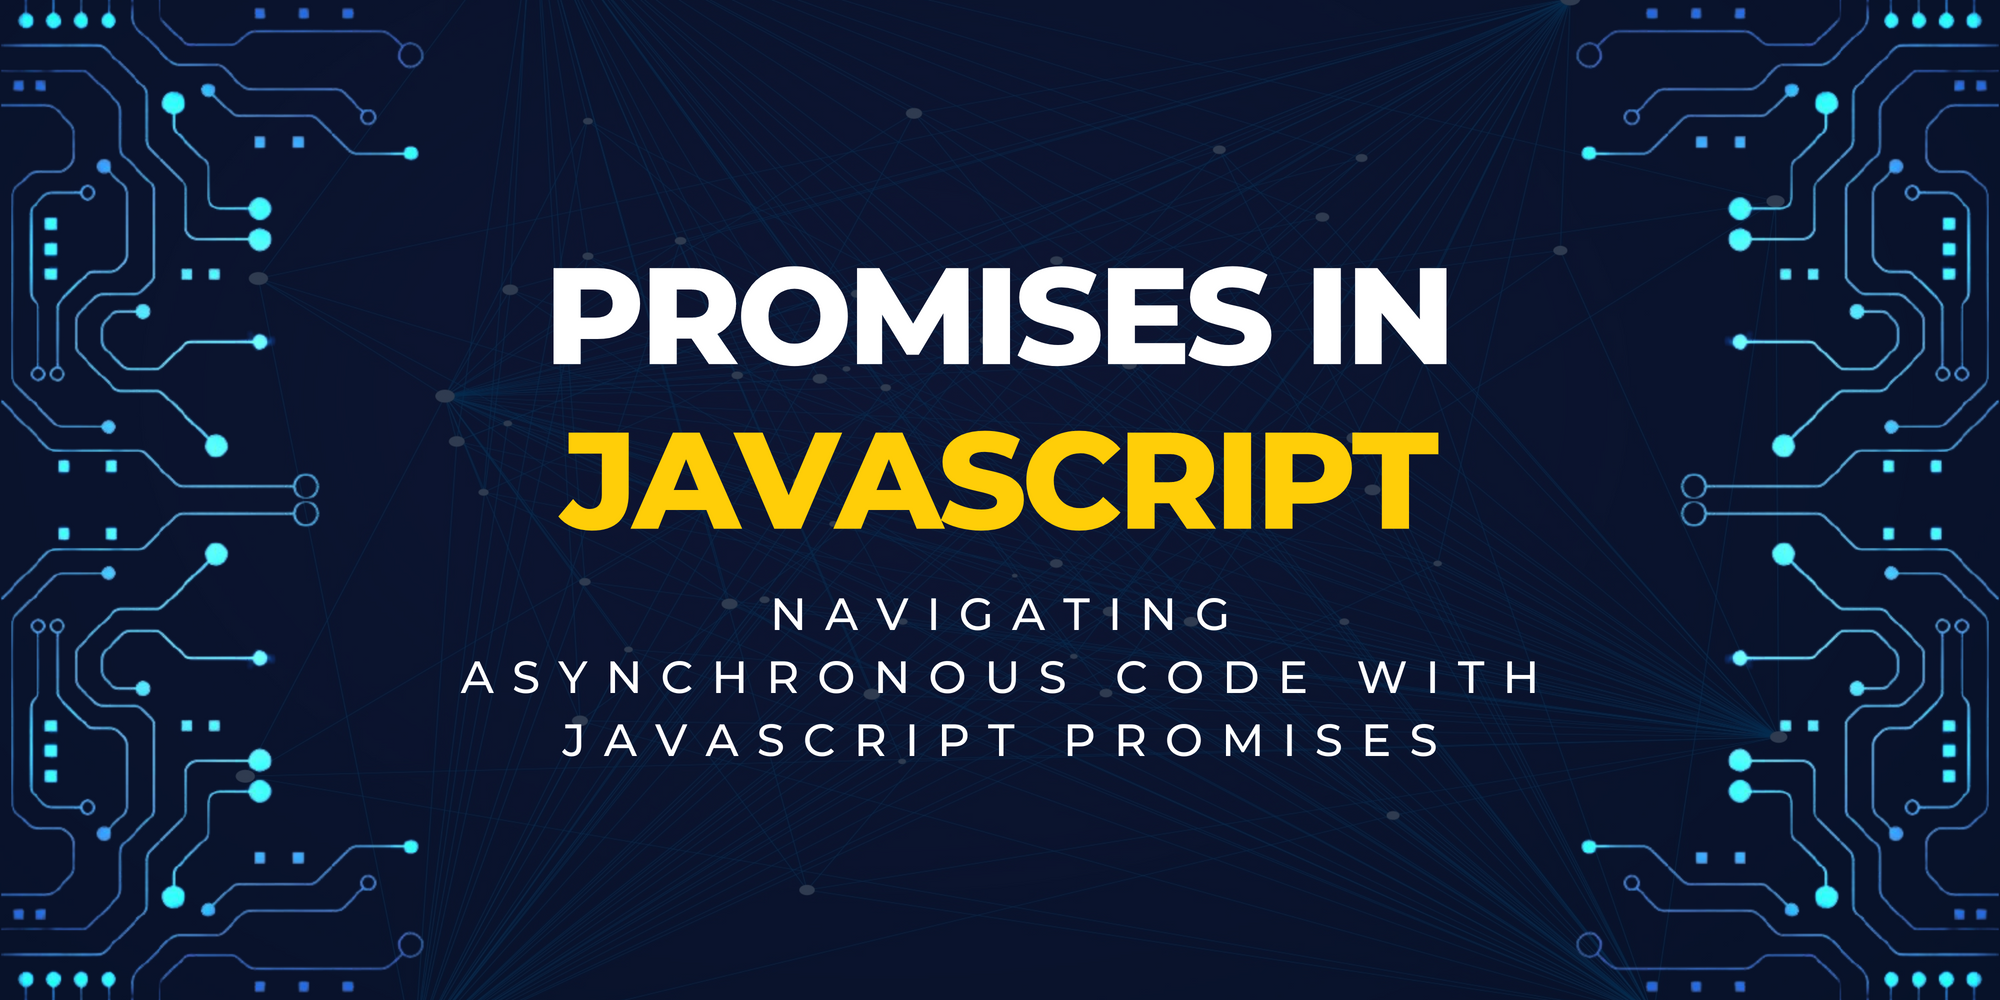 Navigating Asynchronous Code with JavaScript Promises